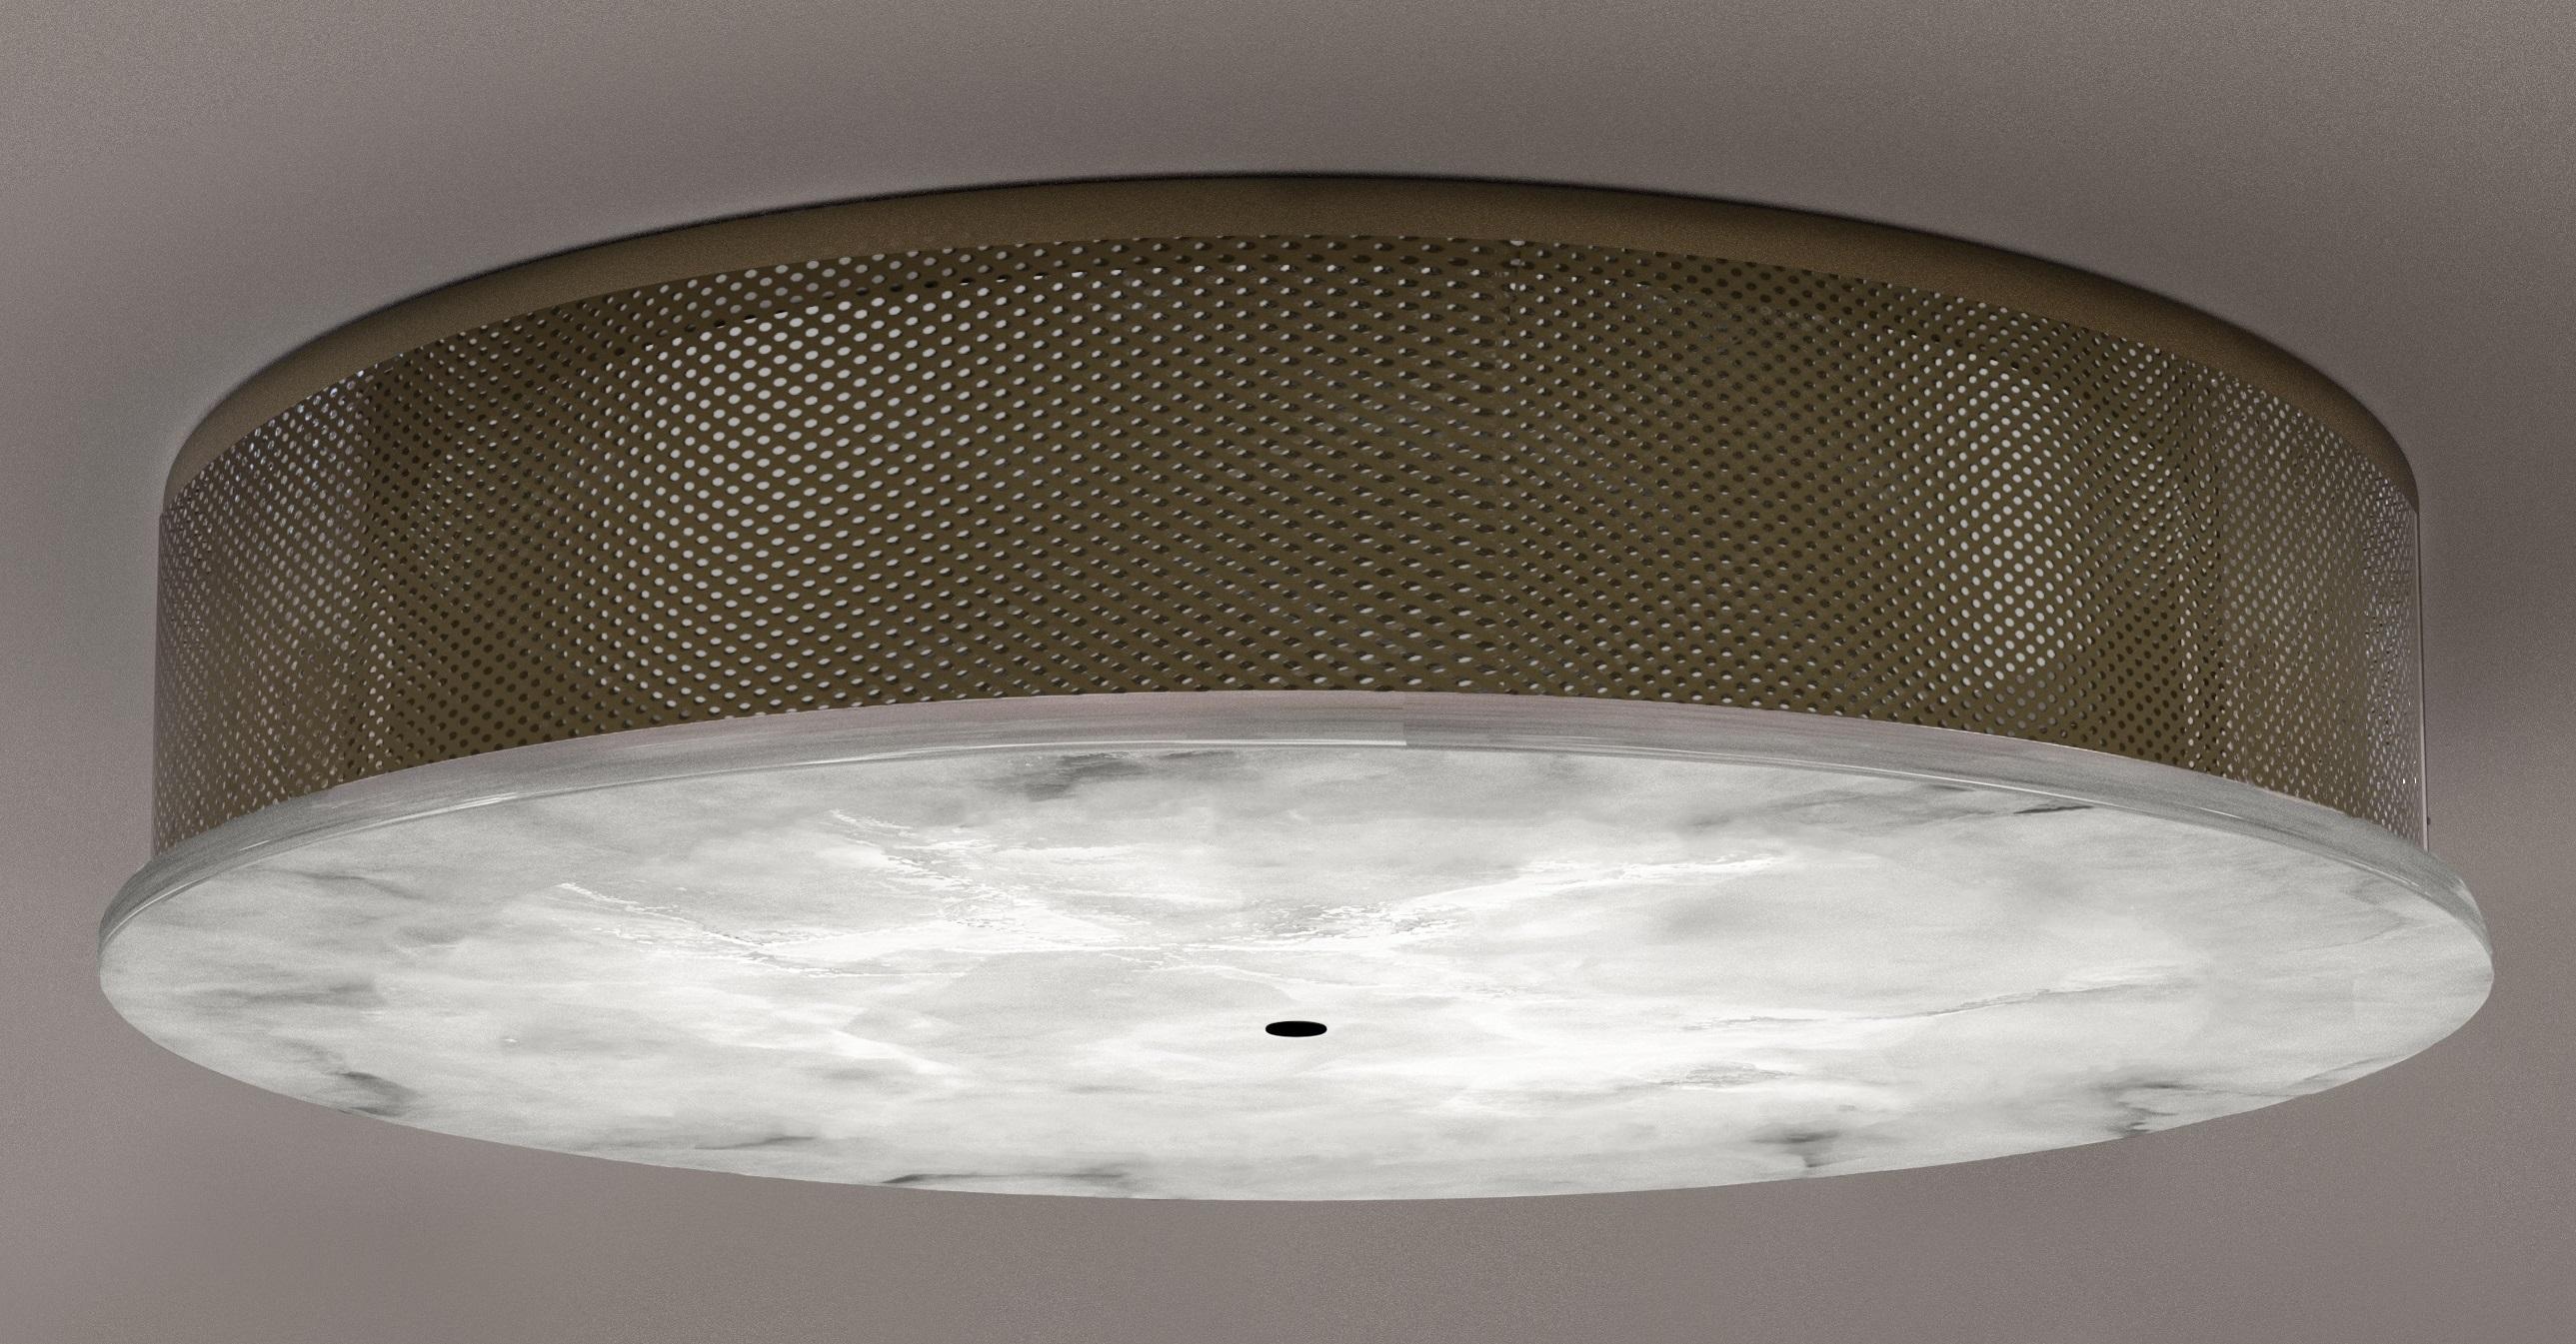 Enkō Brushed Burnished Metal Ceiling Light by Alabastro Italiano
Dimensions: Ø 34,5 x H 9,2 cm.
Materials: White alabaster and brushed burnished metal.

Available in different finishes: Shiny Silver, Bronze, Brushed Brass, Ruggine of Florence,